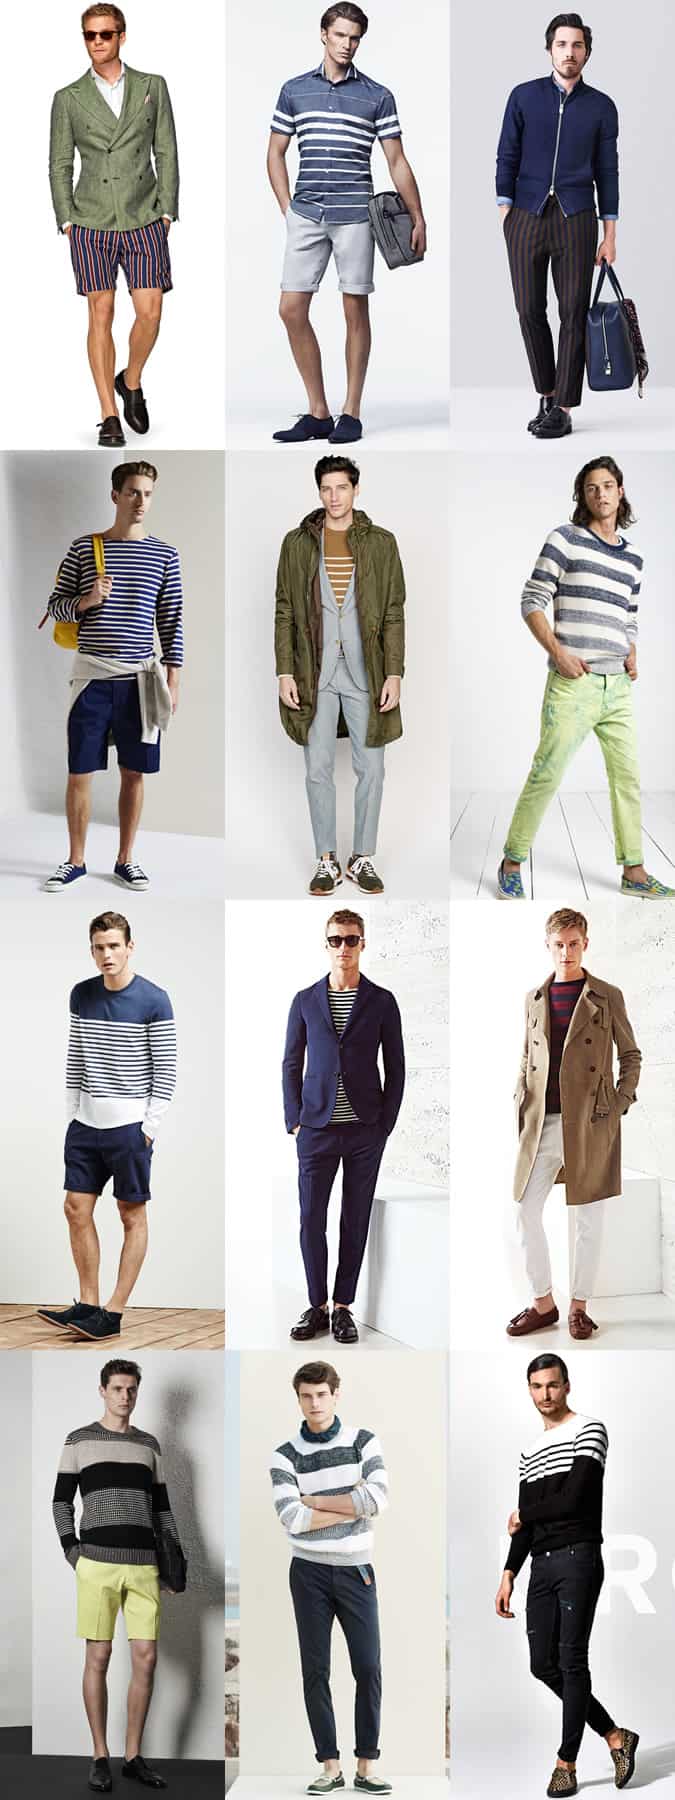 Men's Striped Clothing Spring/Summer Outfit Inspiration Lookbook